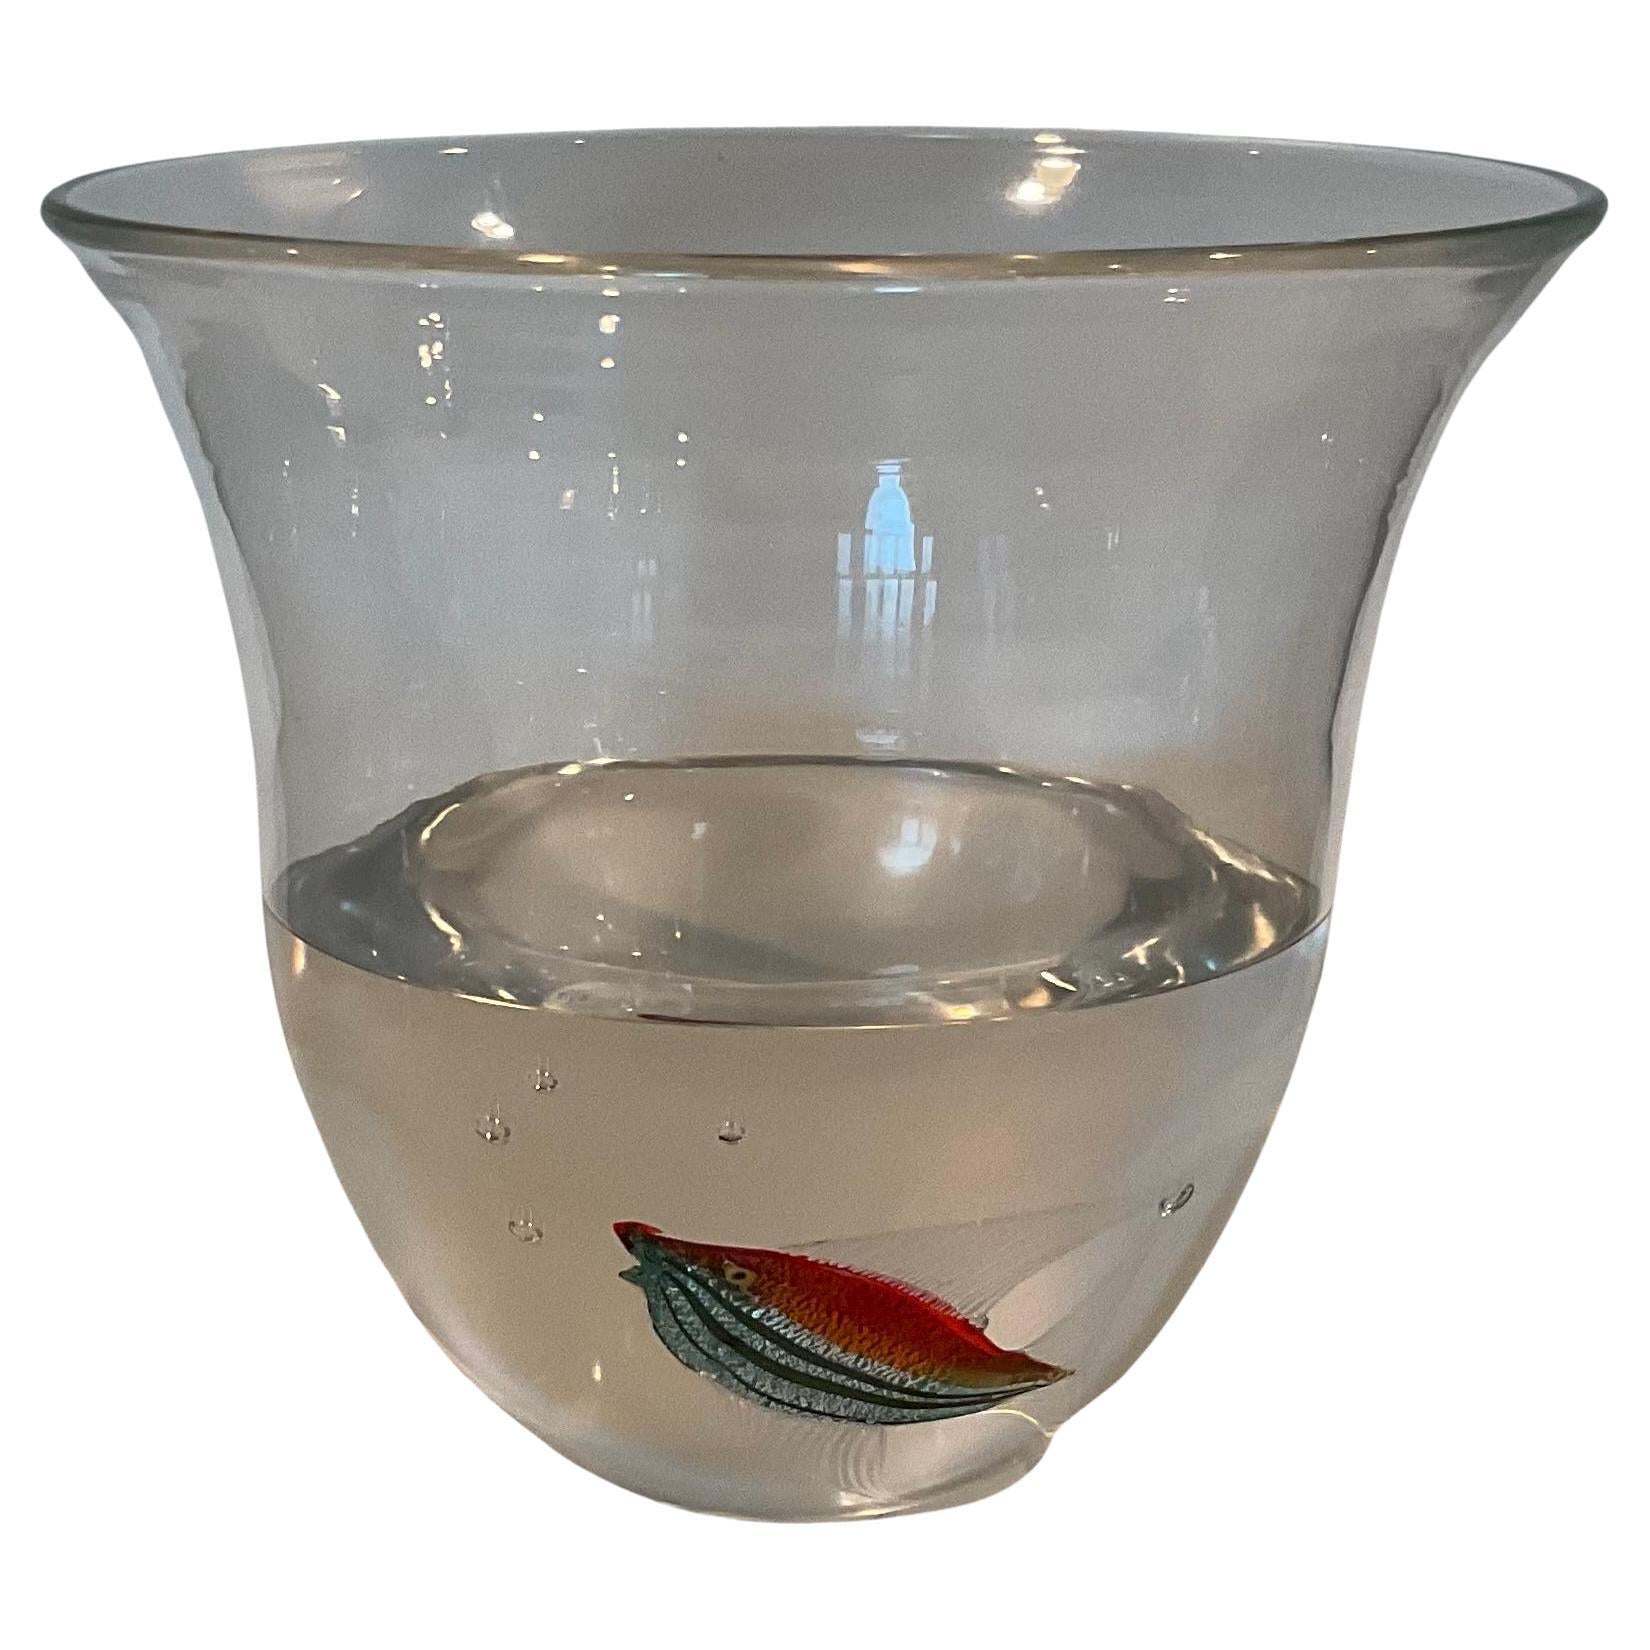 Pino Signoretto Murano Art Glass Aquarium Vase signed by the artist dated 1985  For Sale